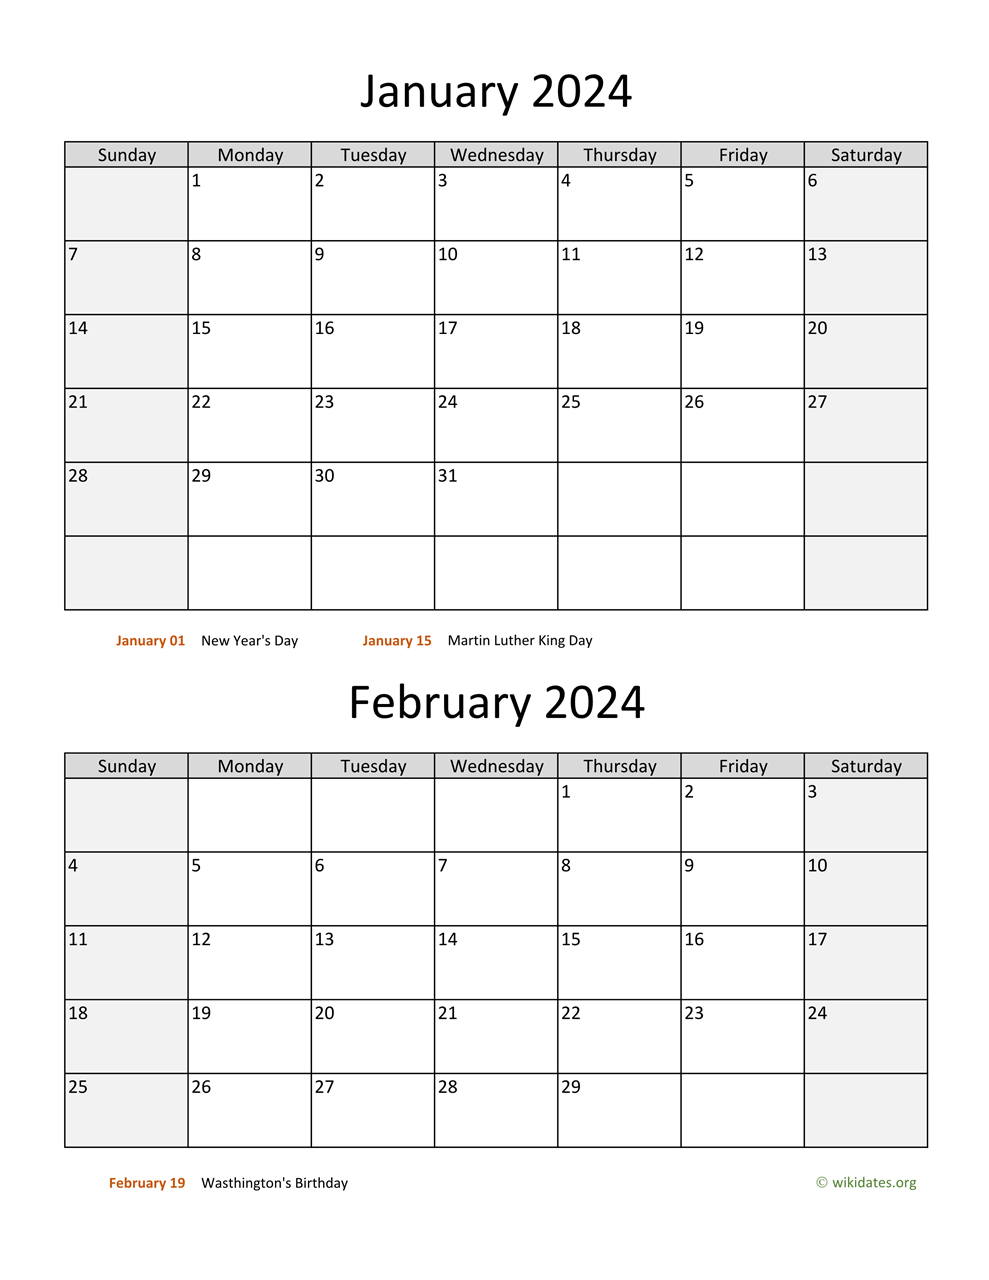 January And February 2024 Calendar | Wikidates for Printable Calendar January February 2024